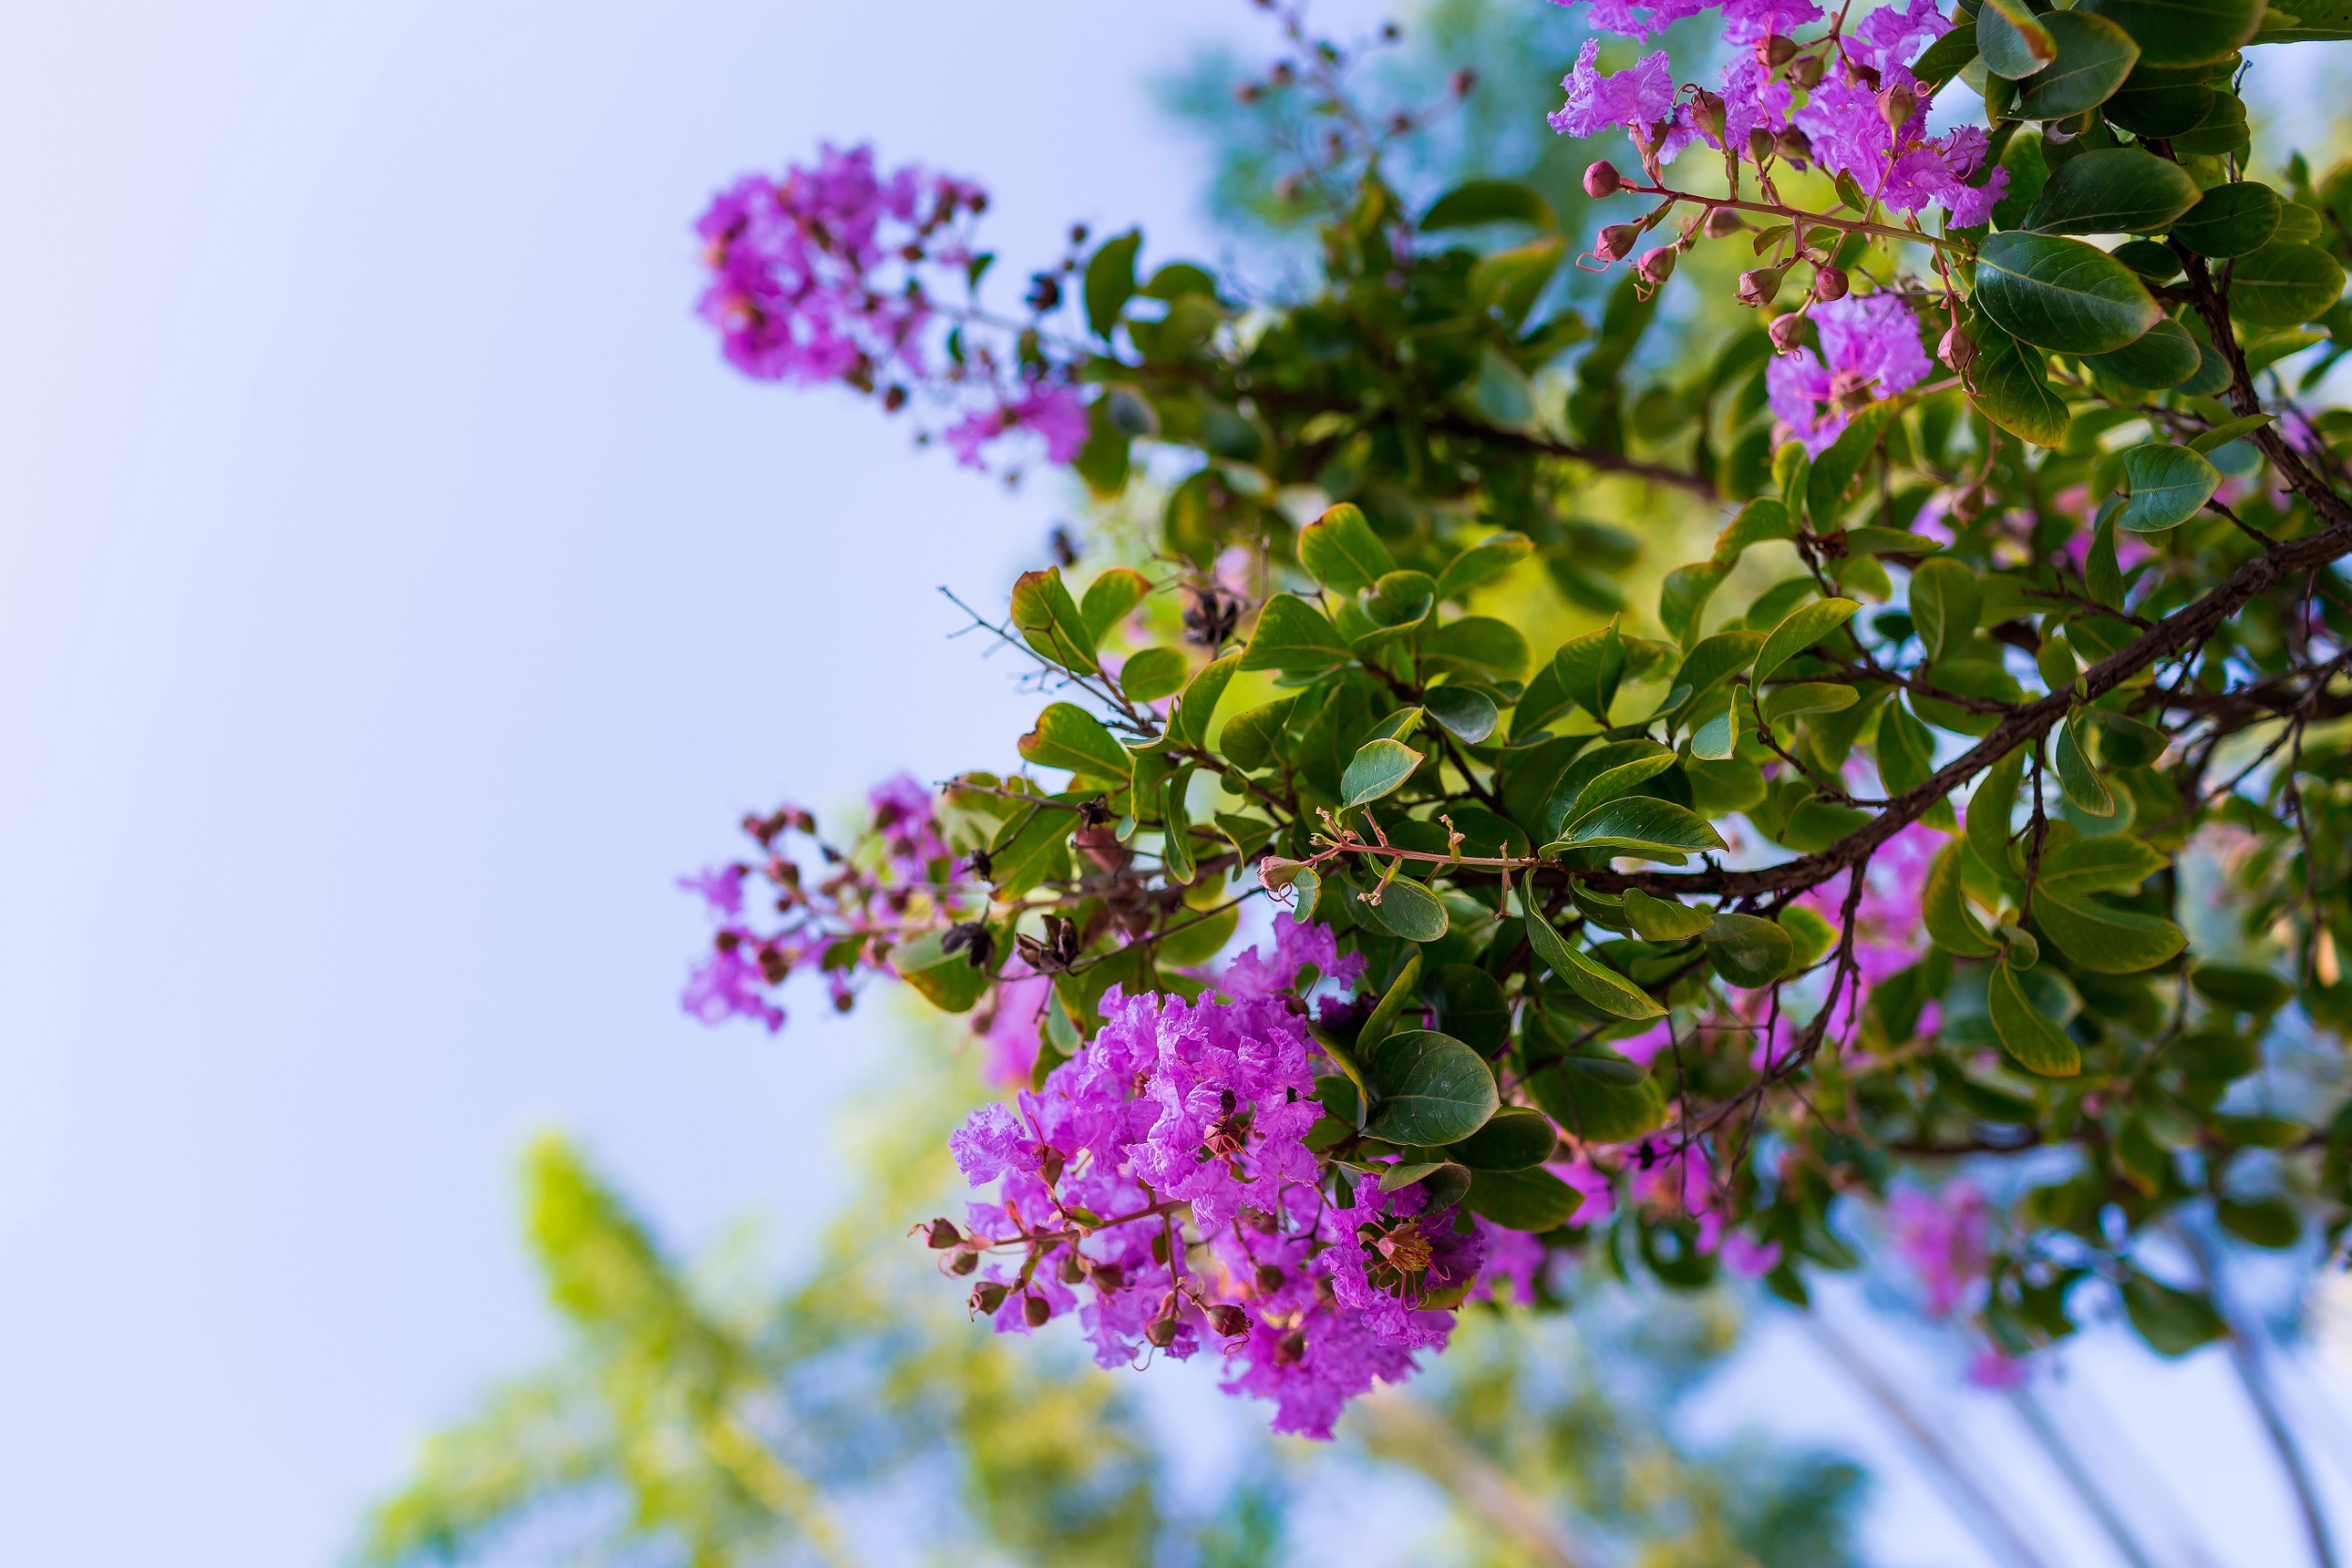 maintenance tips for crape myrtle trees